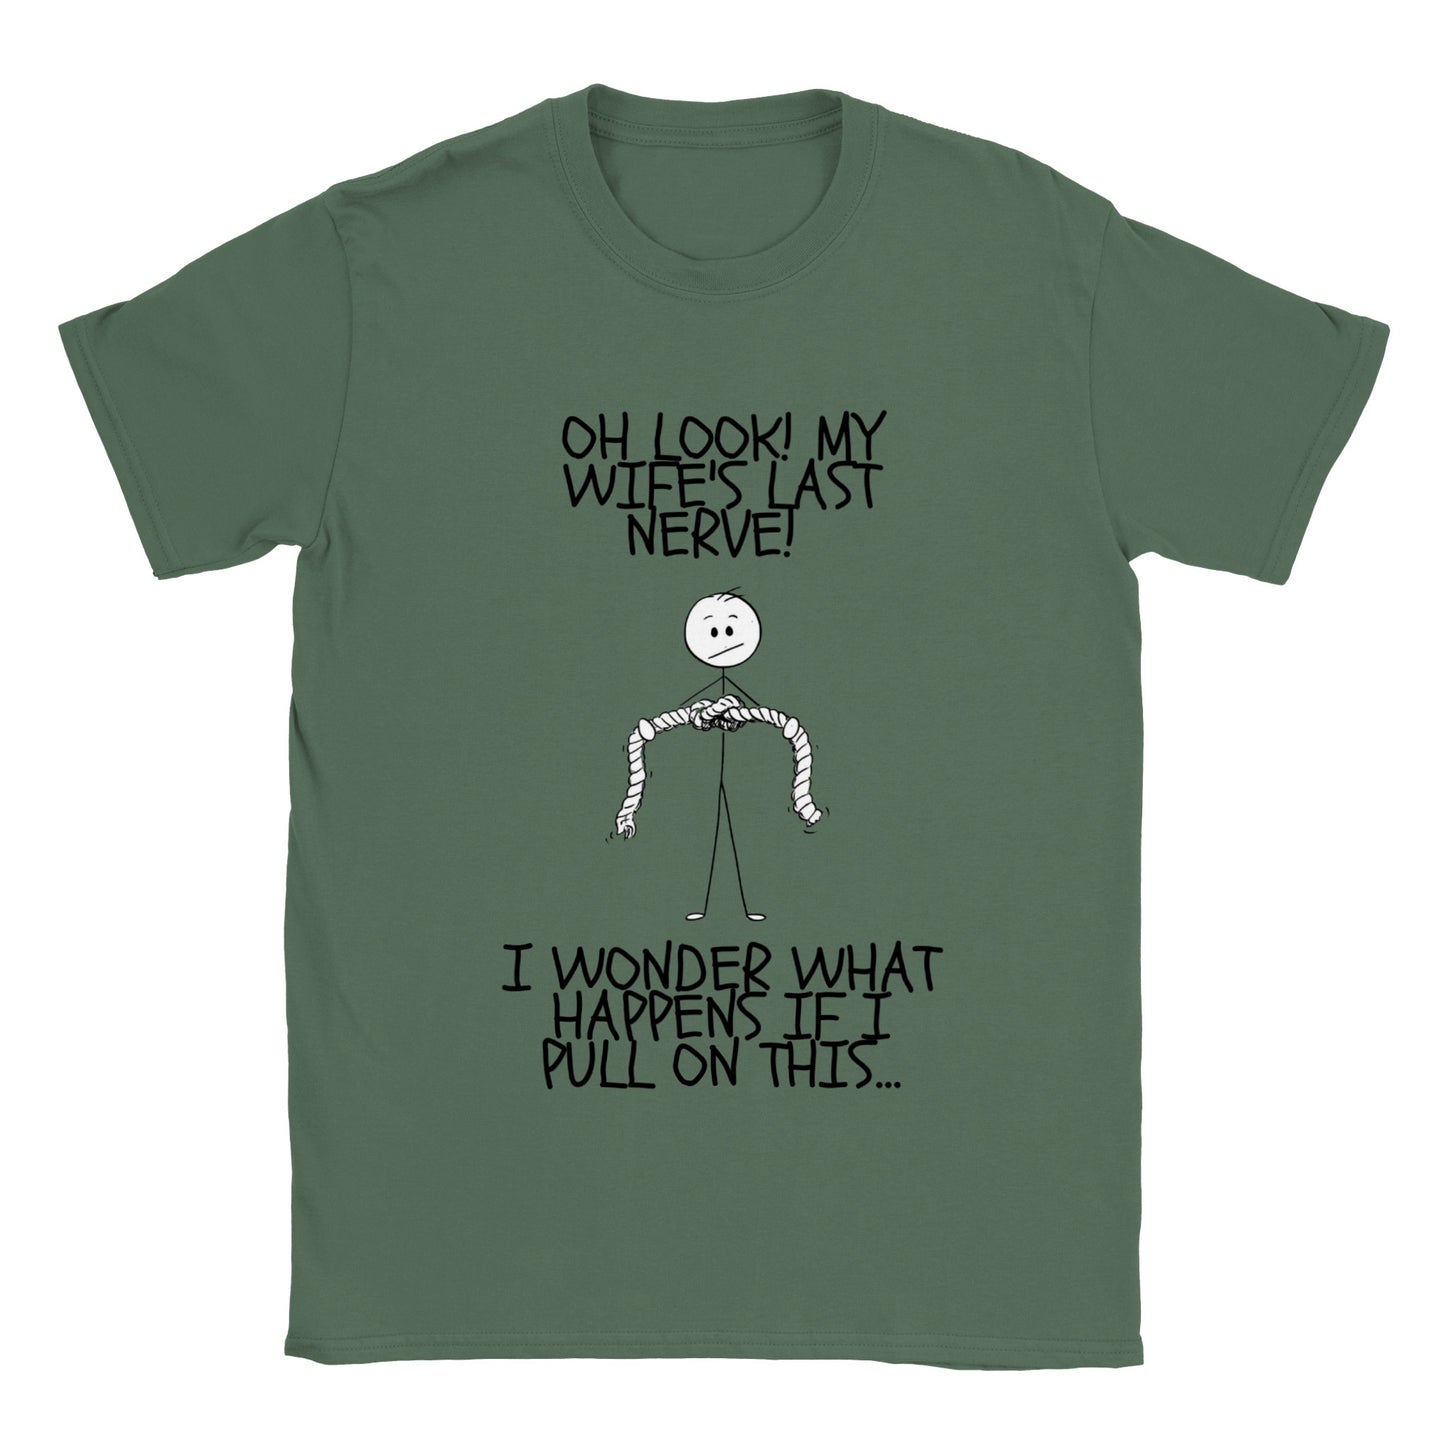 Oh Look!  My Wife's Last Nerve...  Classic Unisex Crewneck T-shirt - Mister Snarky's